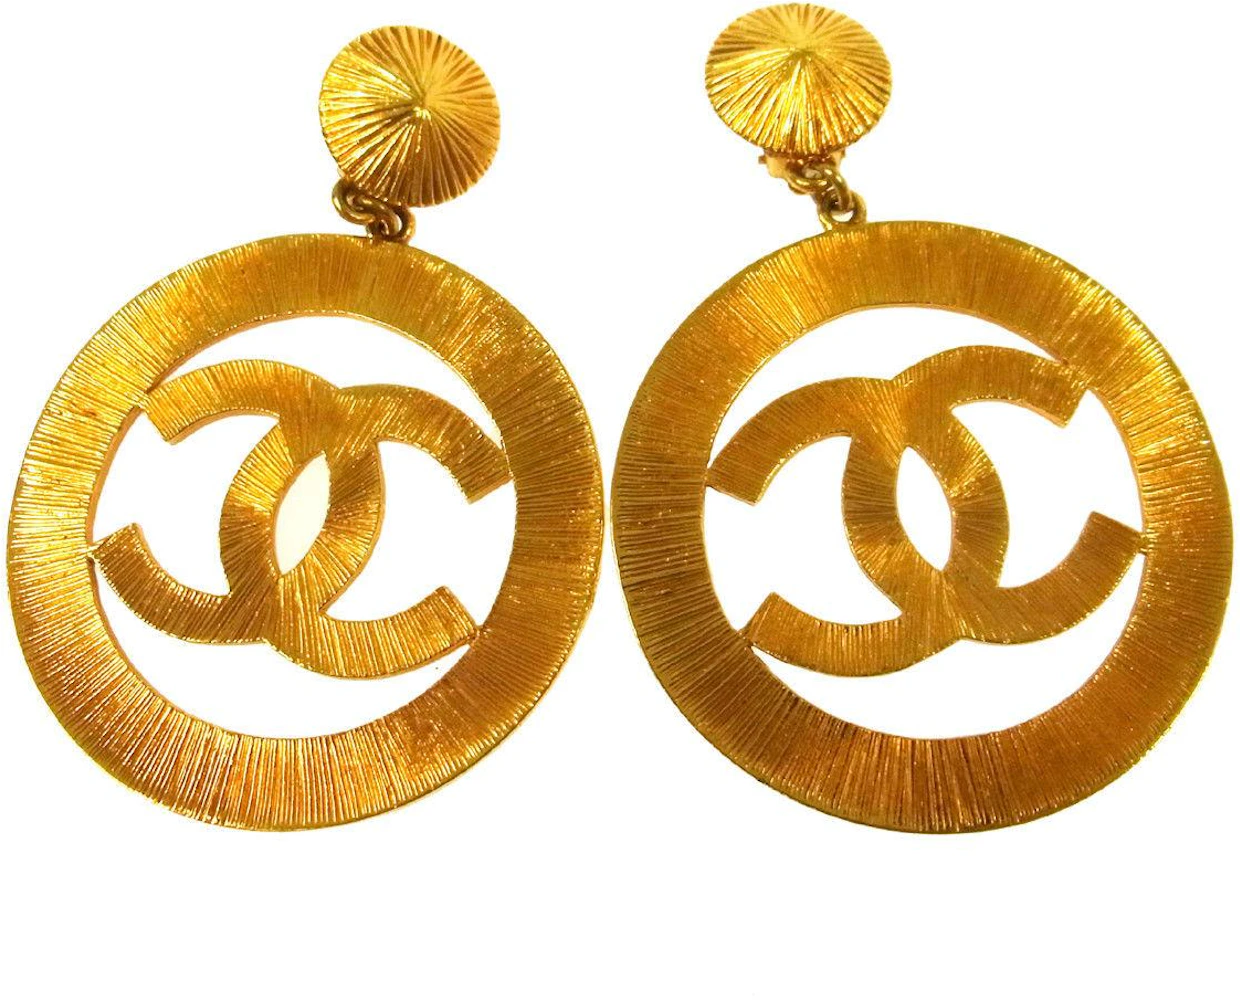 Chanel-Inspired Drop Earrings in Lambskin and Metal for a Chic